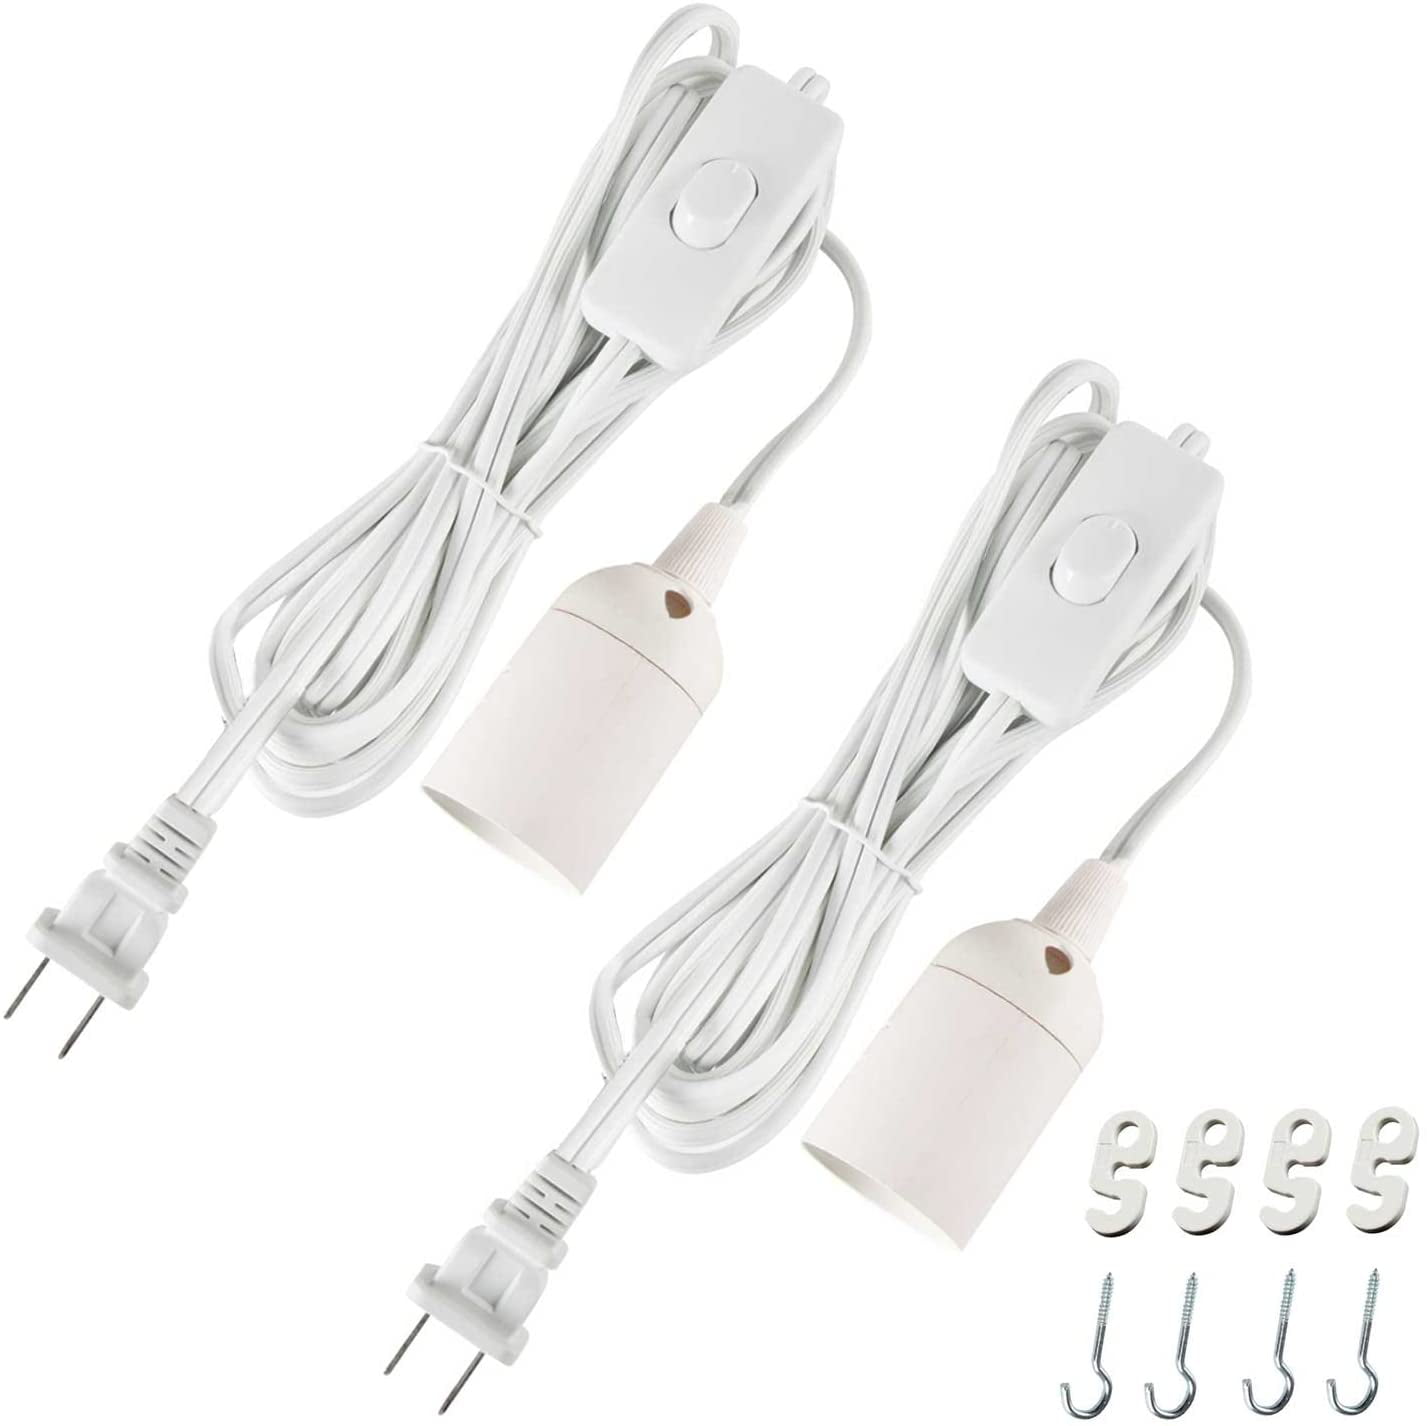 E27 Socket Hanging Lamp Light Cord 11 Feet Lantern Extension Cable with E26 